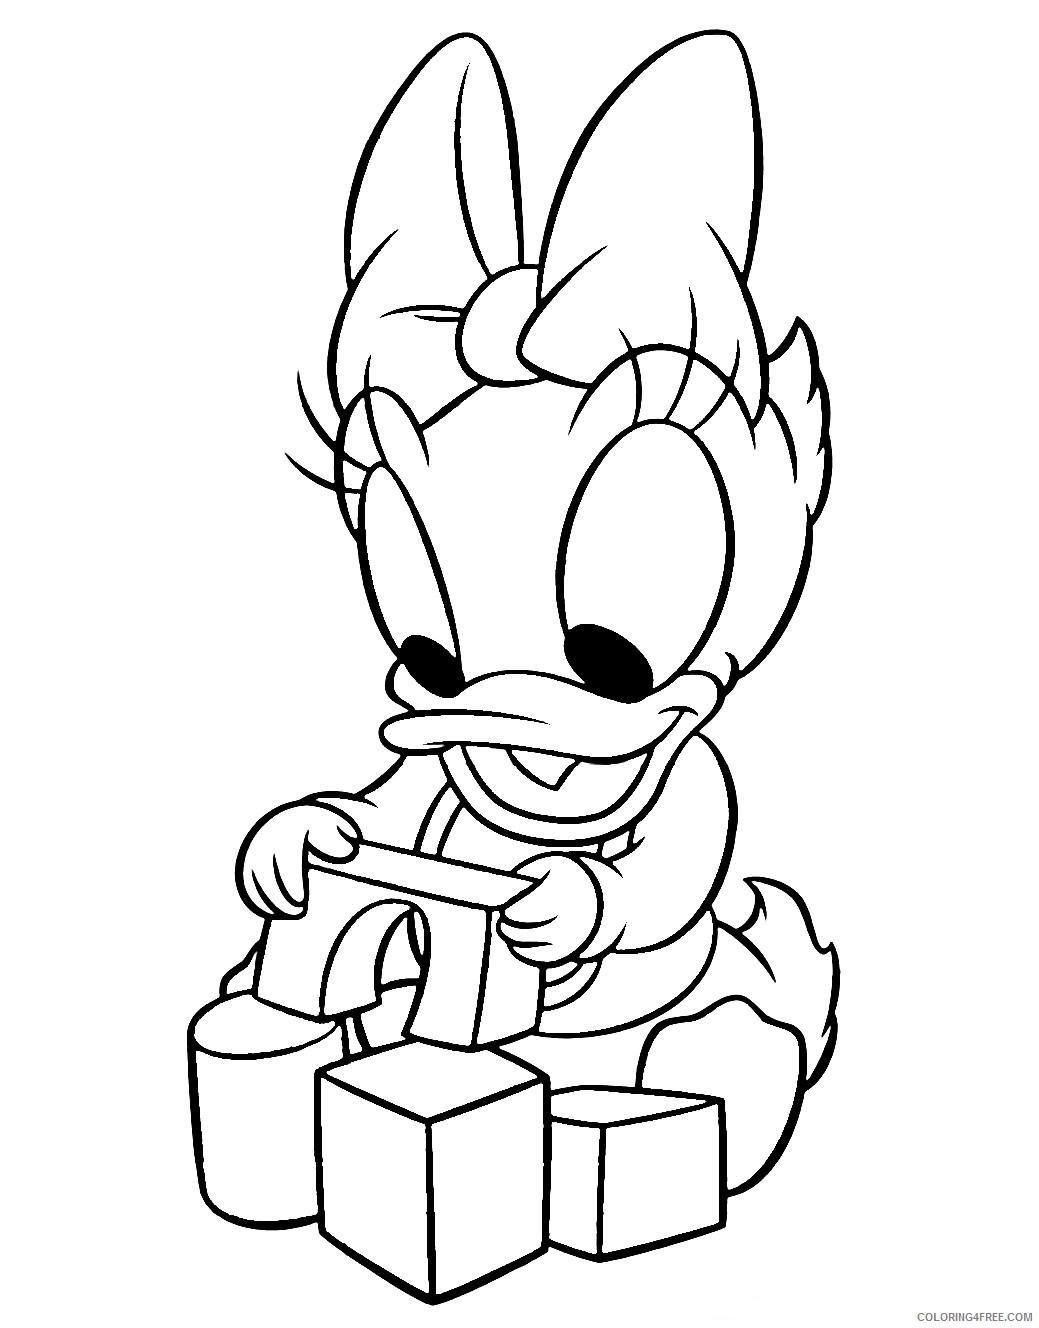 Daisy Duck Coloring Pages Cartoons Baby Animal Daisy Duck Printable 2020 1985 Coloring4free Coloring4free Com